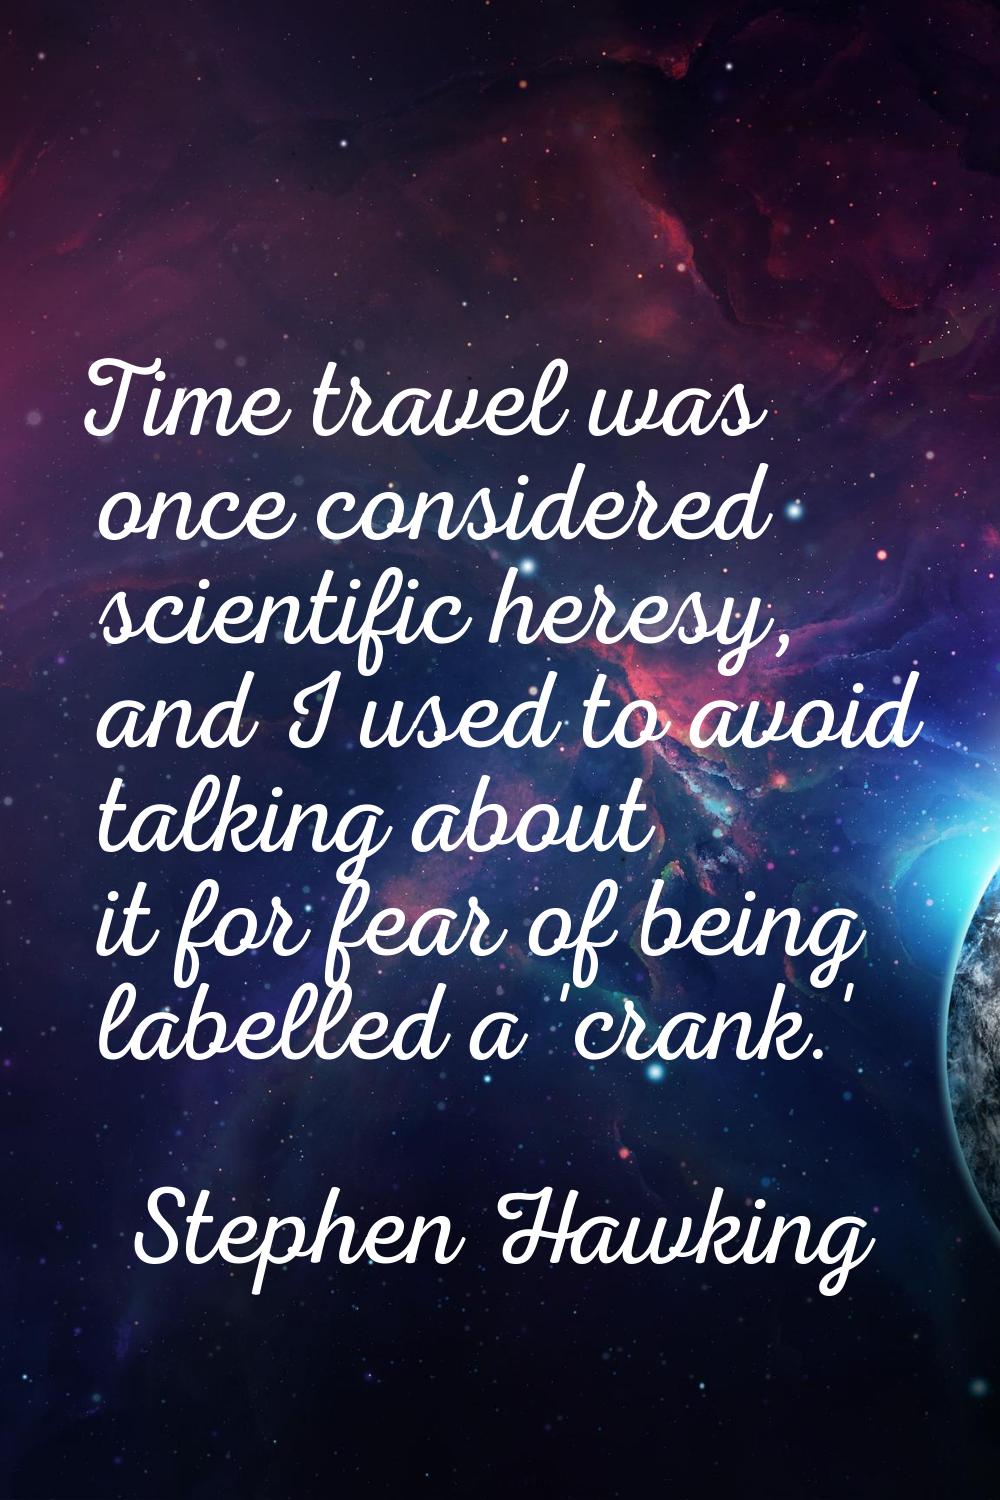 Time travel was once considered scientific heresy, and I used to avoid talking about it for fear of